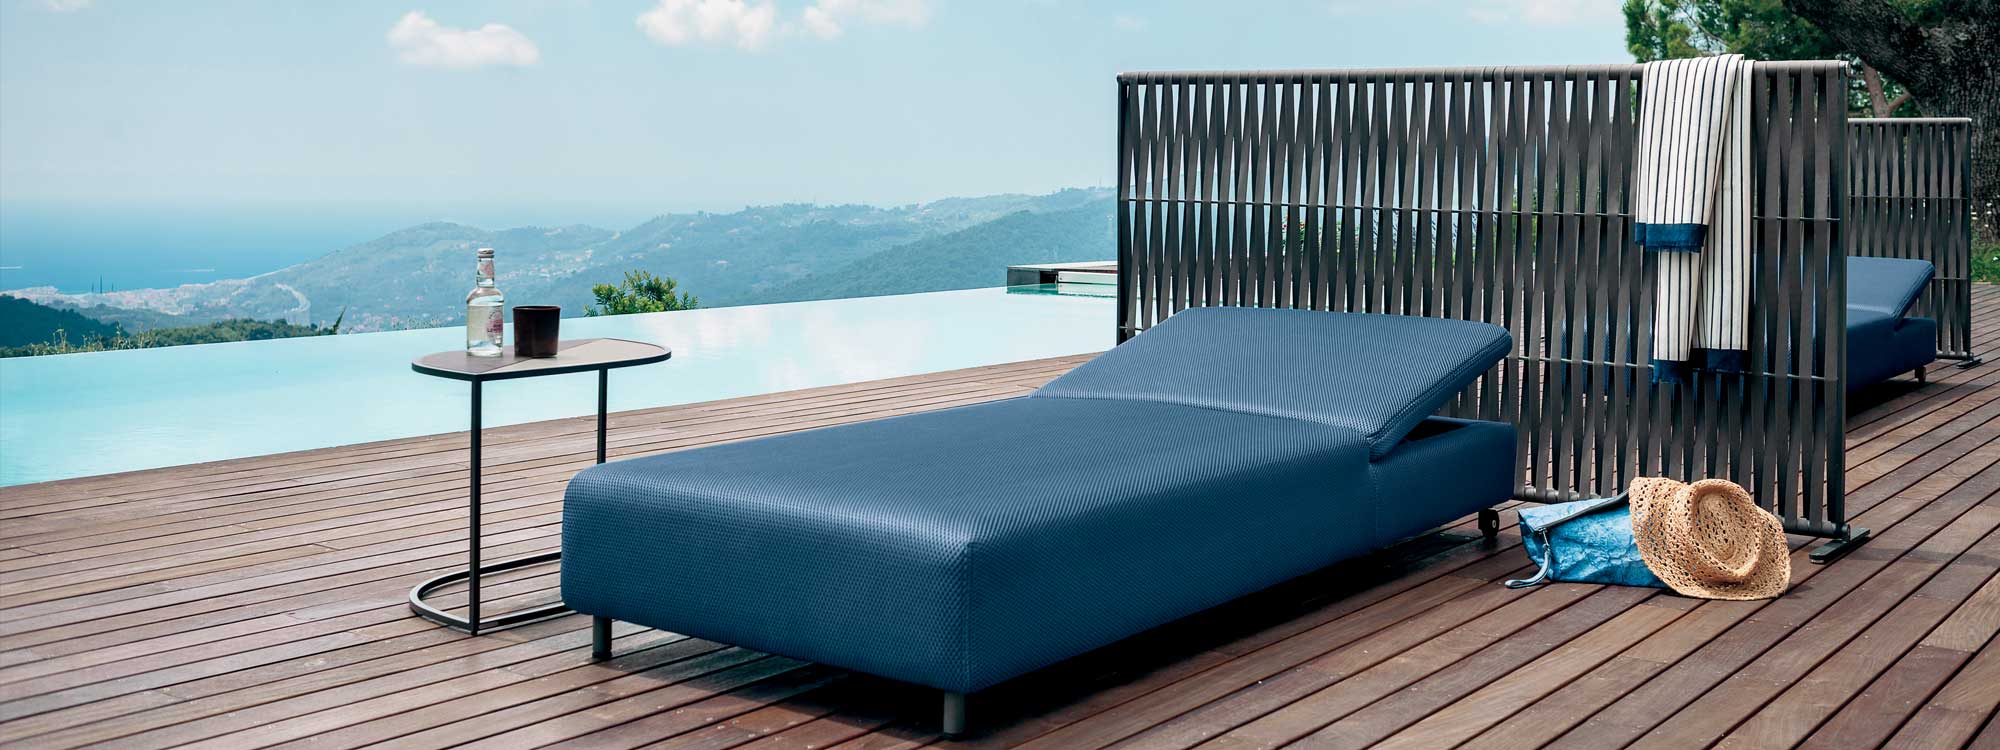 Double LUXURY SUN LOUNGER Is A MODERN Garden SUNBED In HIGH QUALITY Outdoor Furniture MATERIALS By Roda HAND-MADE GARDEN FURNITURE - Italy.